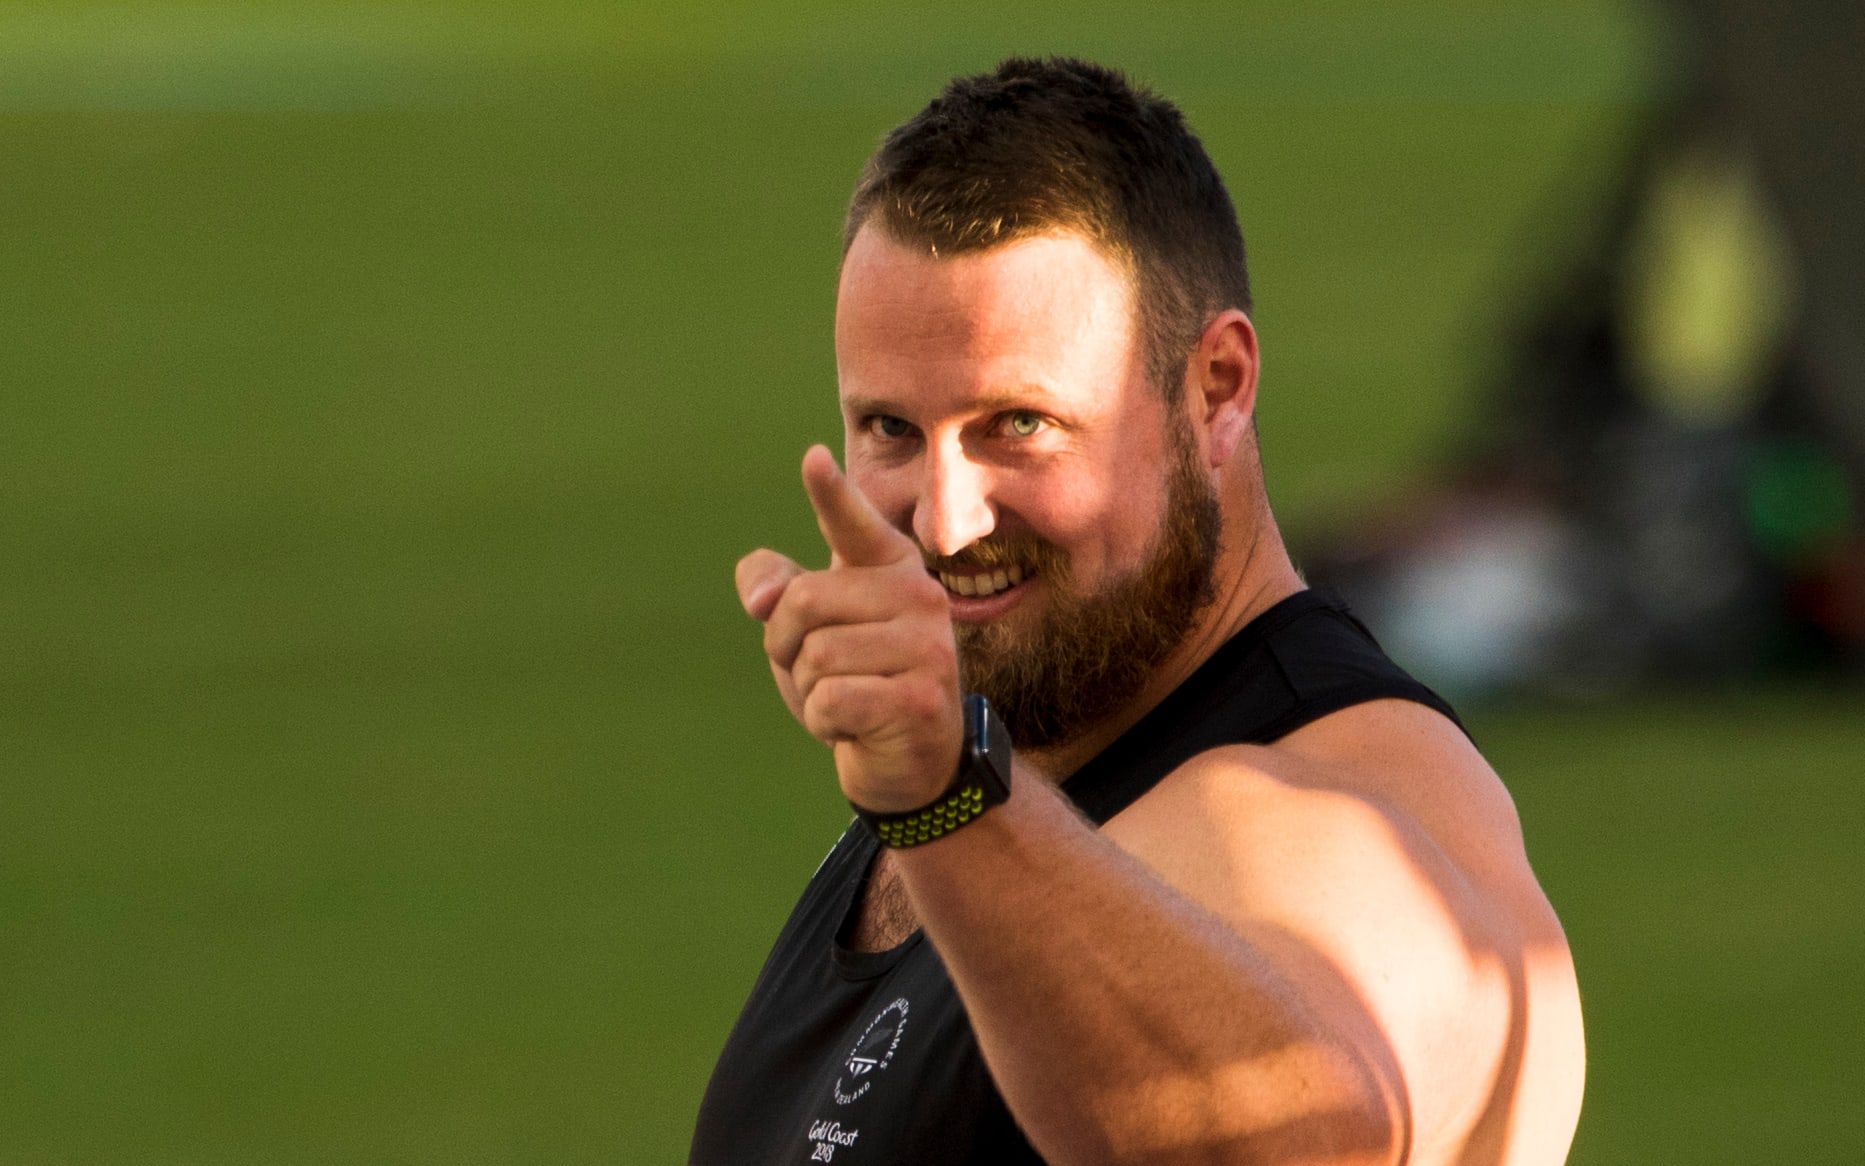 Tom Walsh breaks the Commonwealth Games Record with a new personal best  in the Shot Put Qualifying